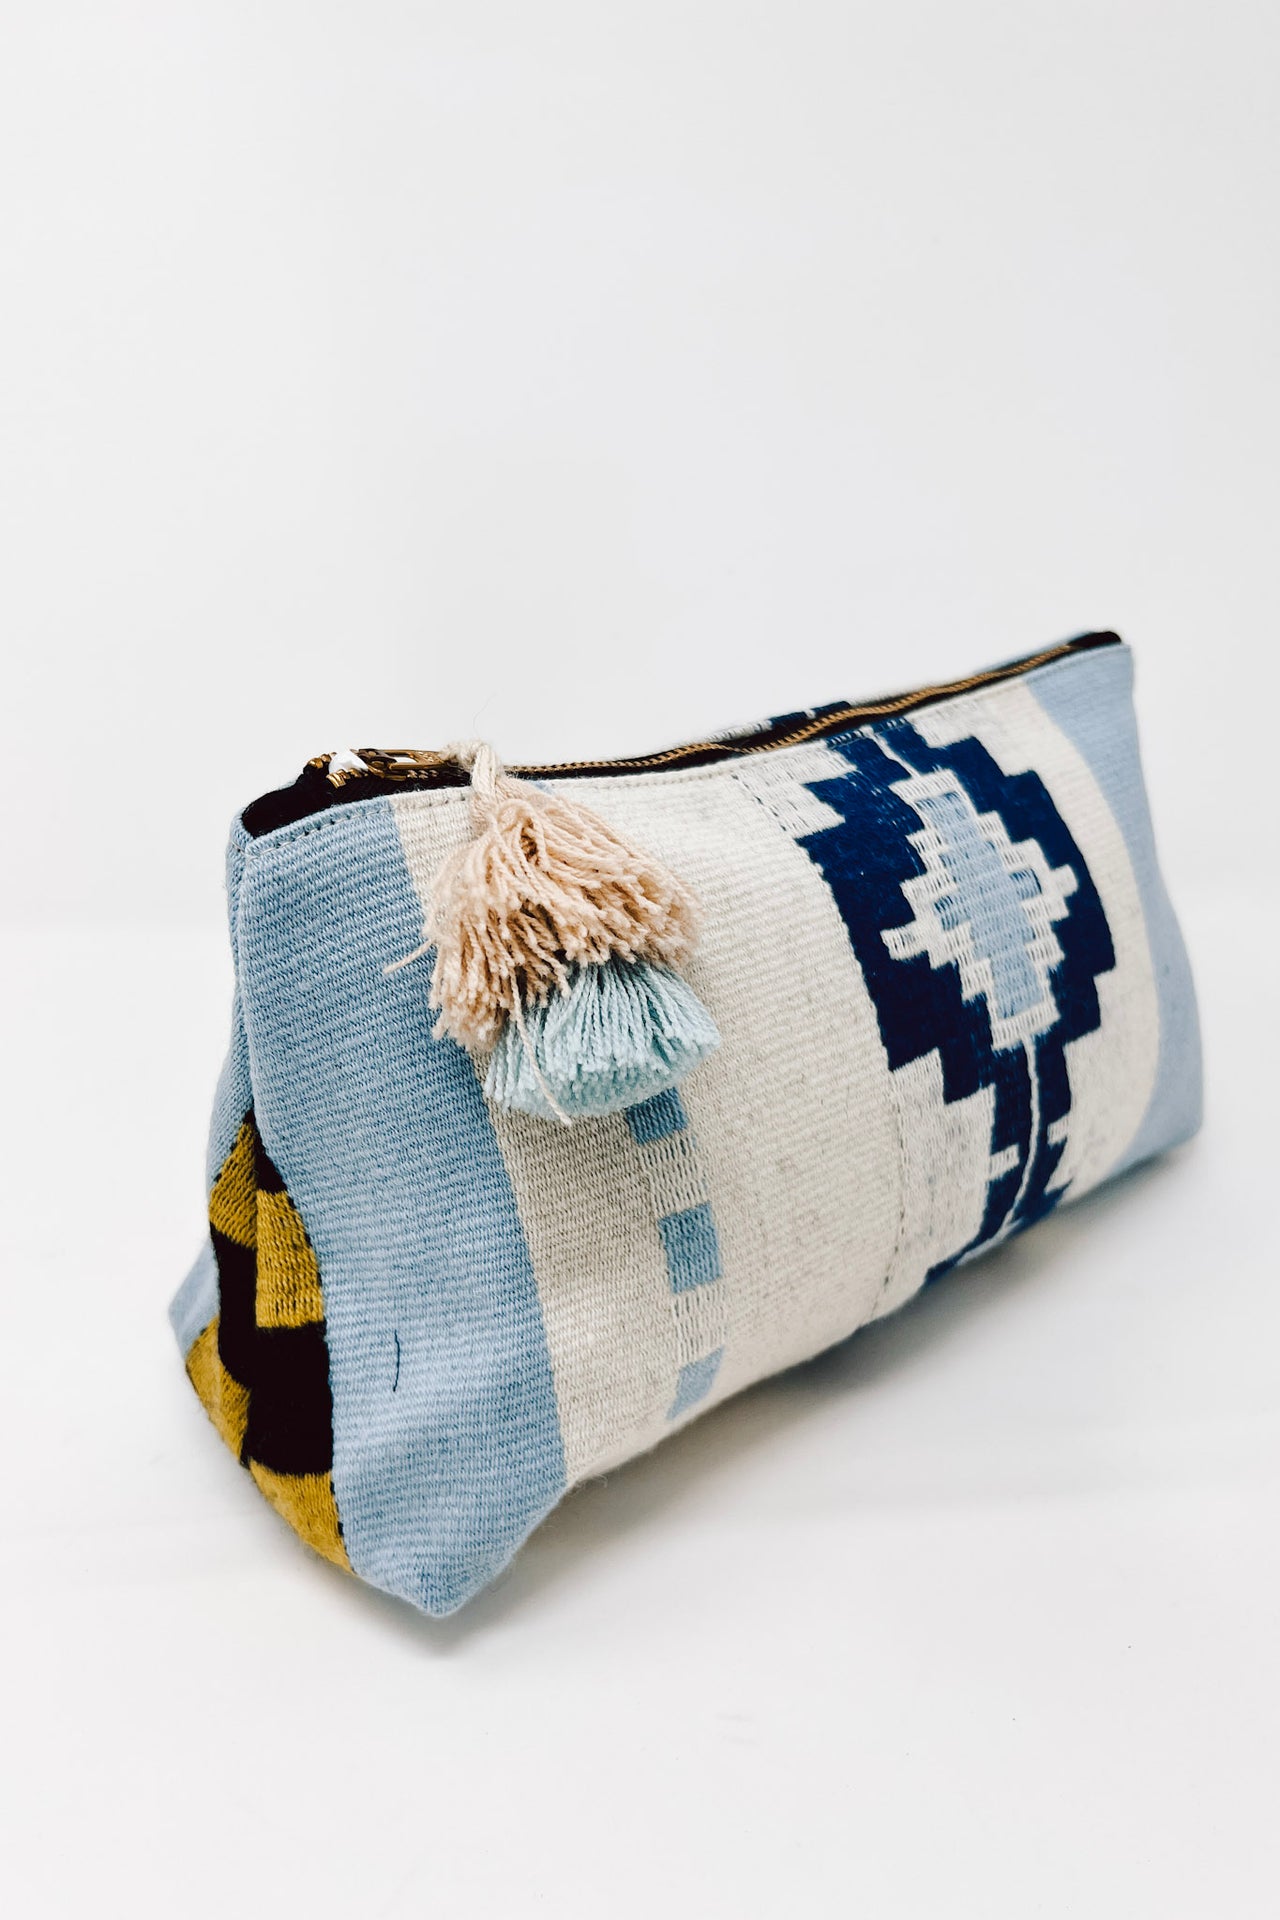 Andean Cosmetic Bag